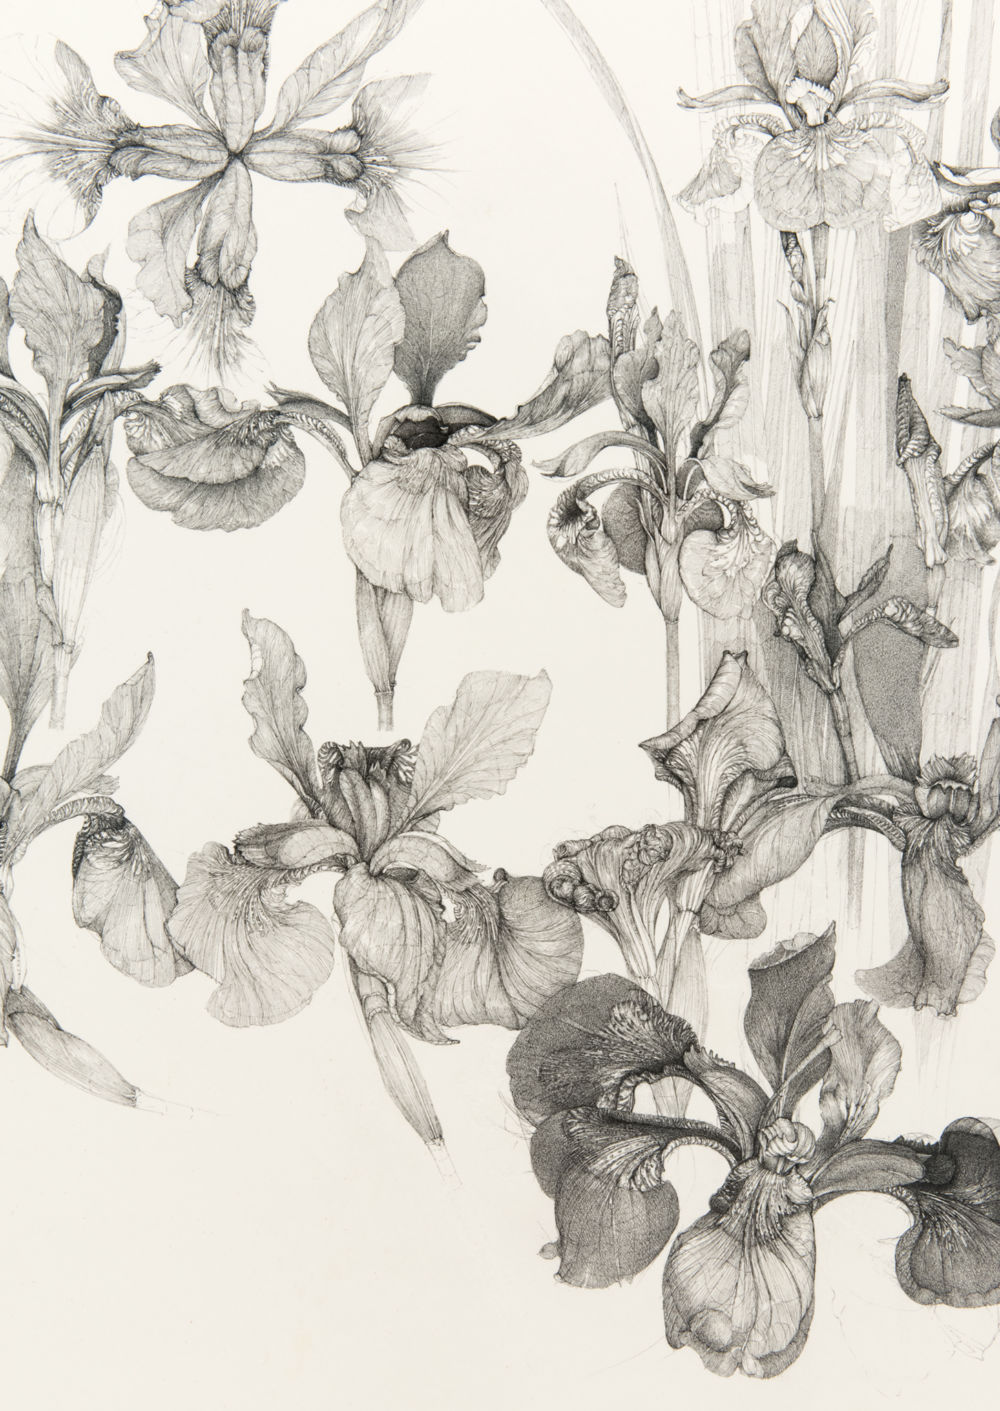 ​Charmian Johnson, detail view, completed 2017, ink on paper, 34 x 26 in. (86 x 66 cm)​​ by 